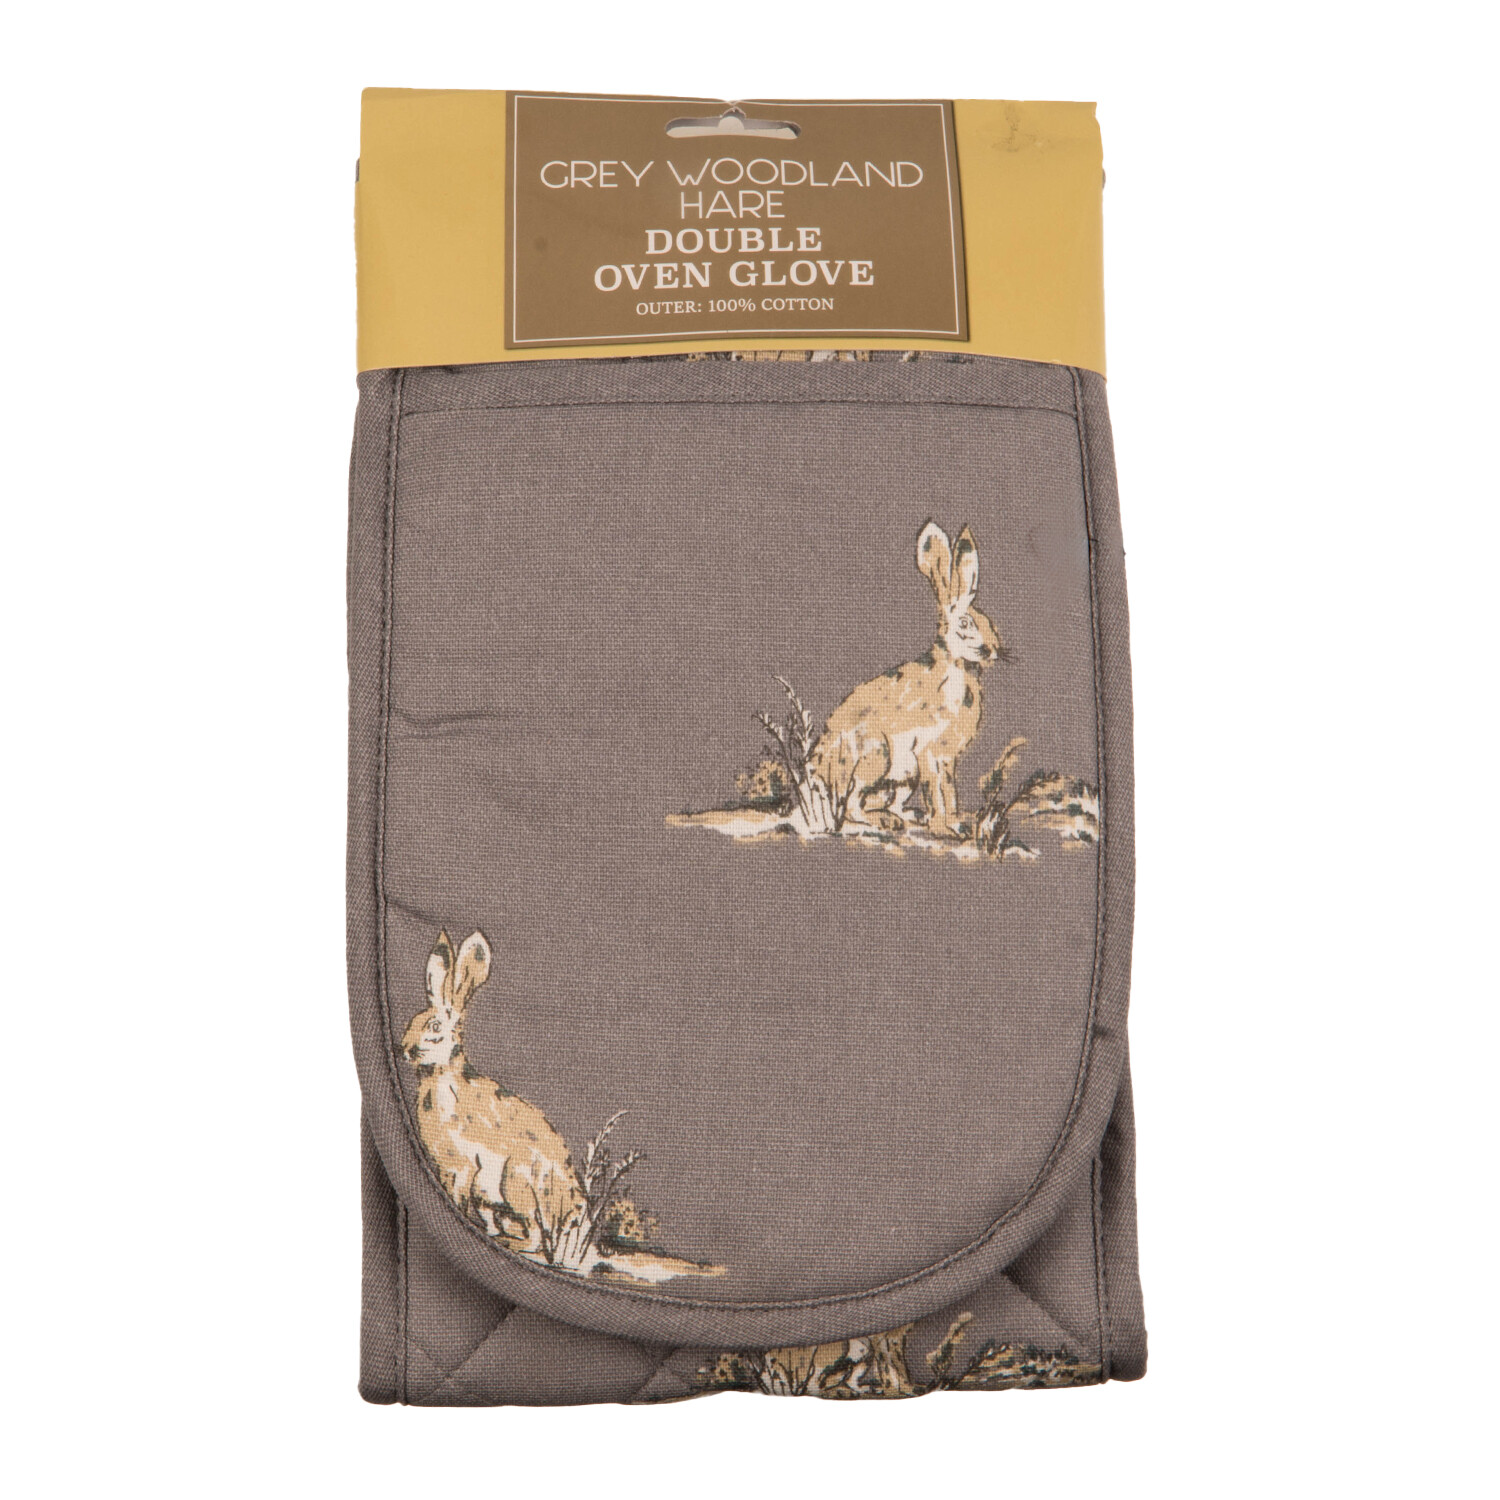 Grey Woodland Hare Double Oven Glove Image